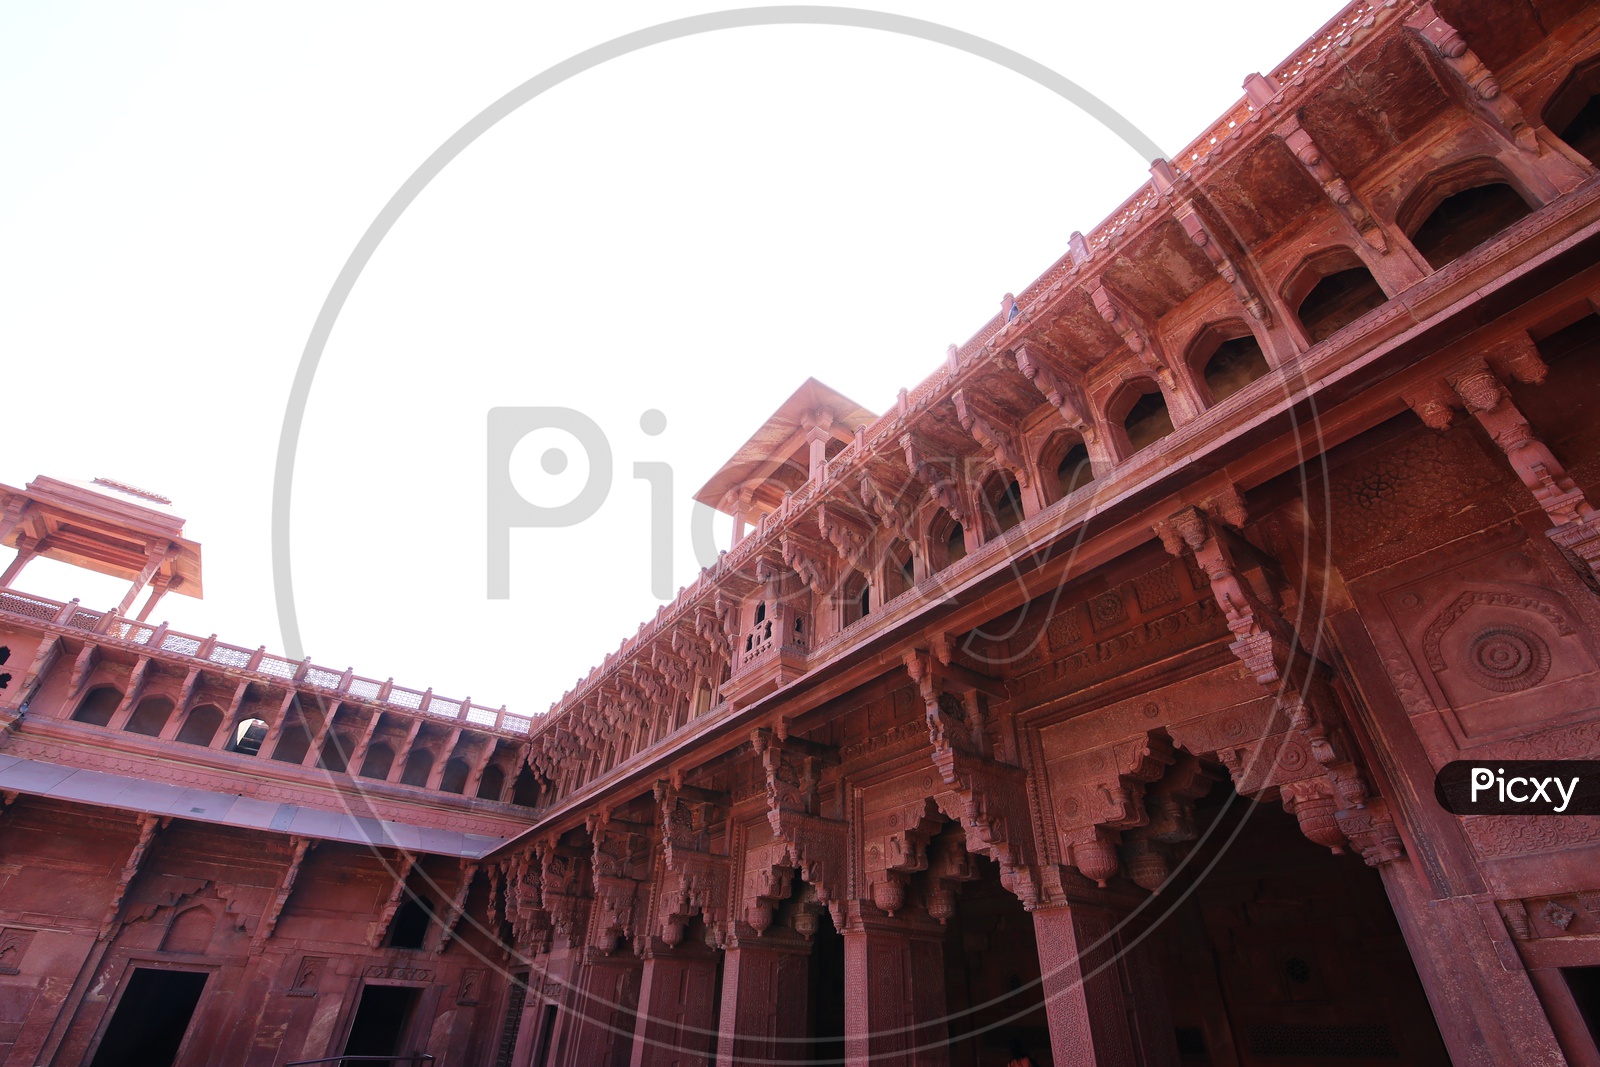 Architectural Views Of Agra Fort Representing The Islamic Architecture